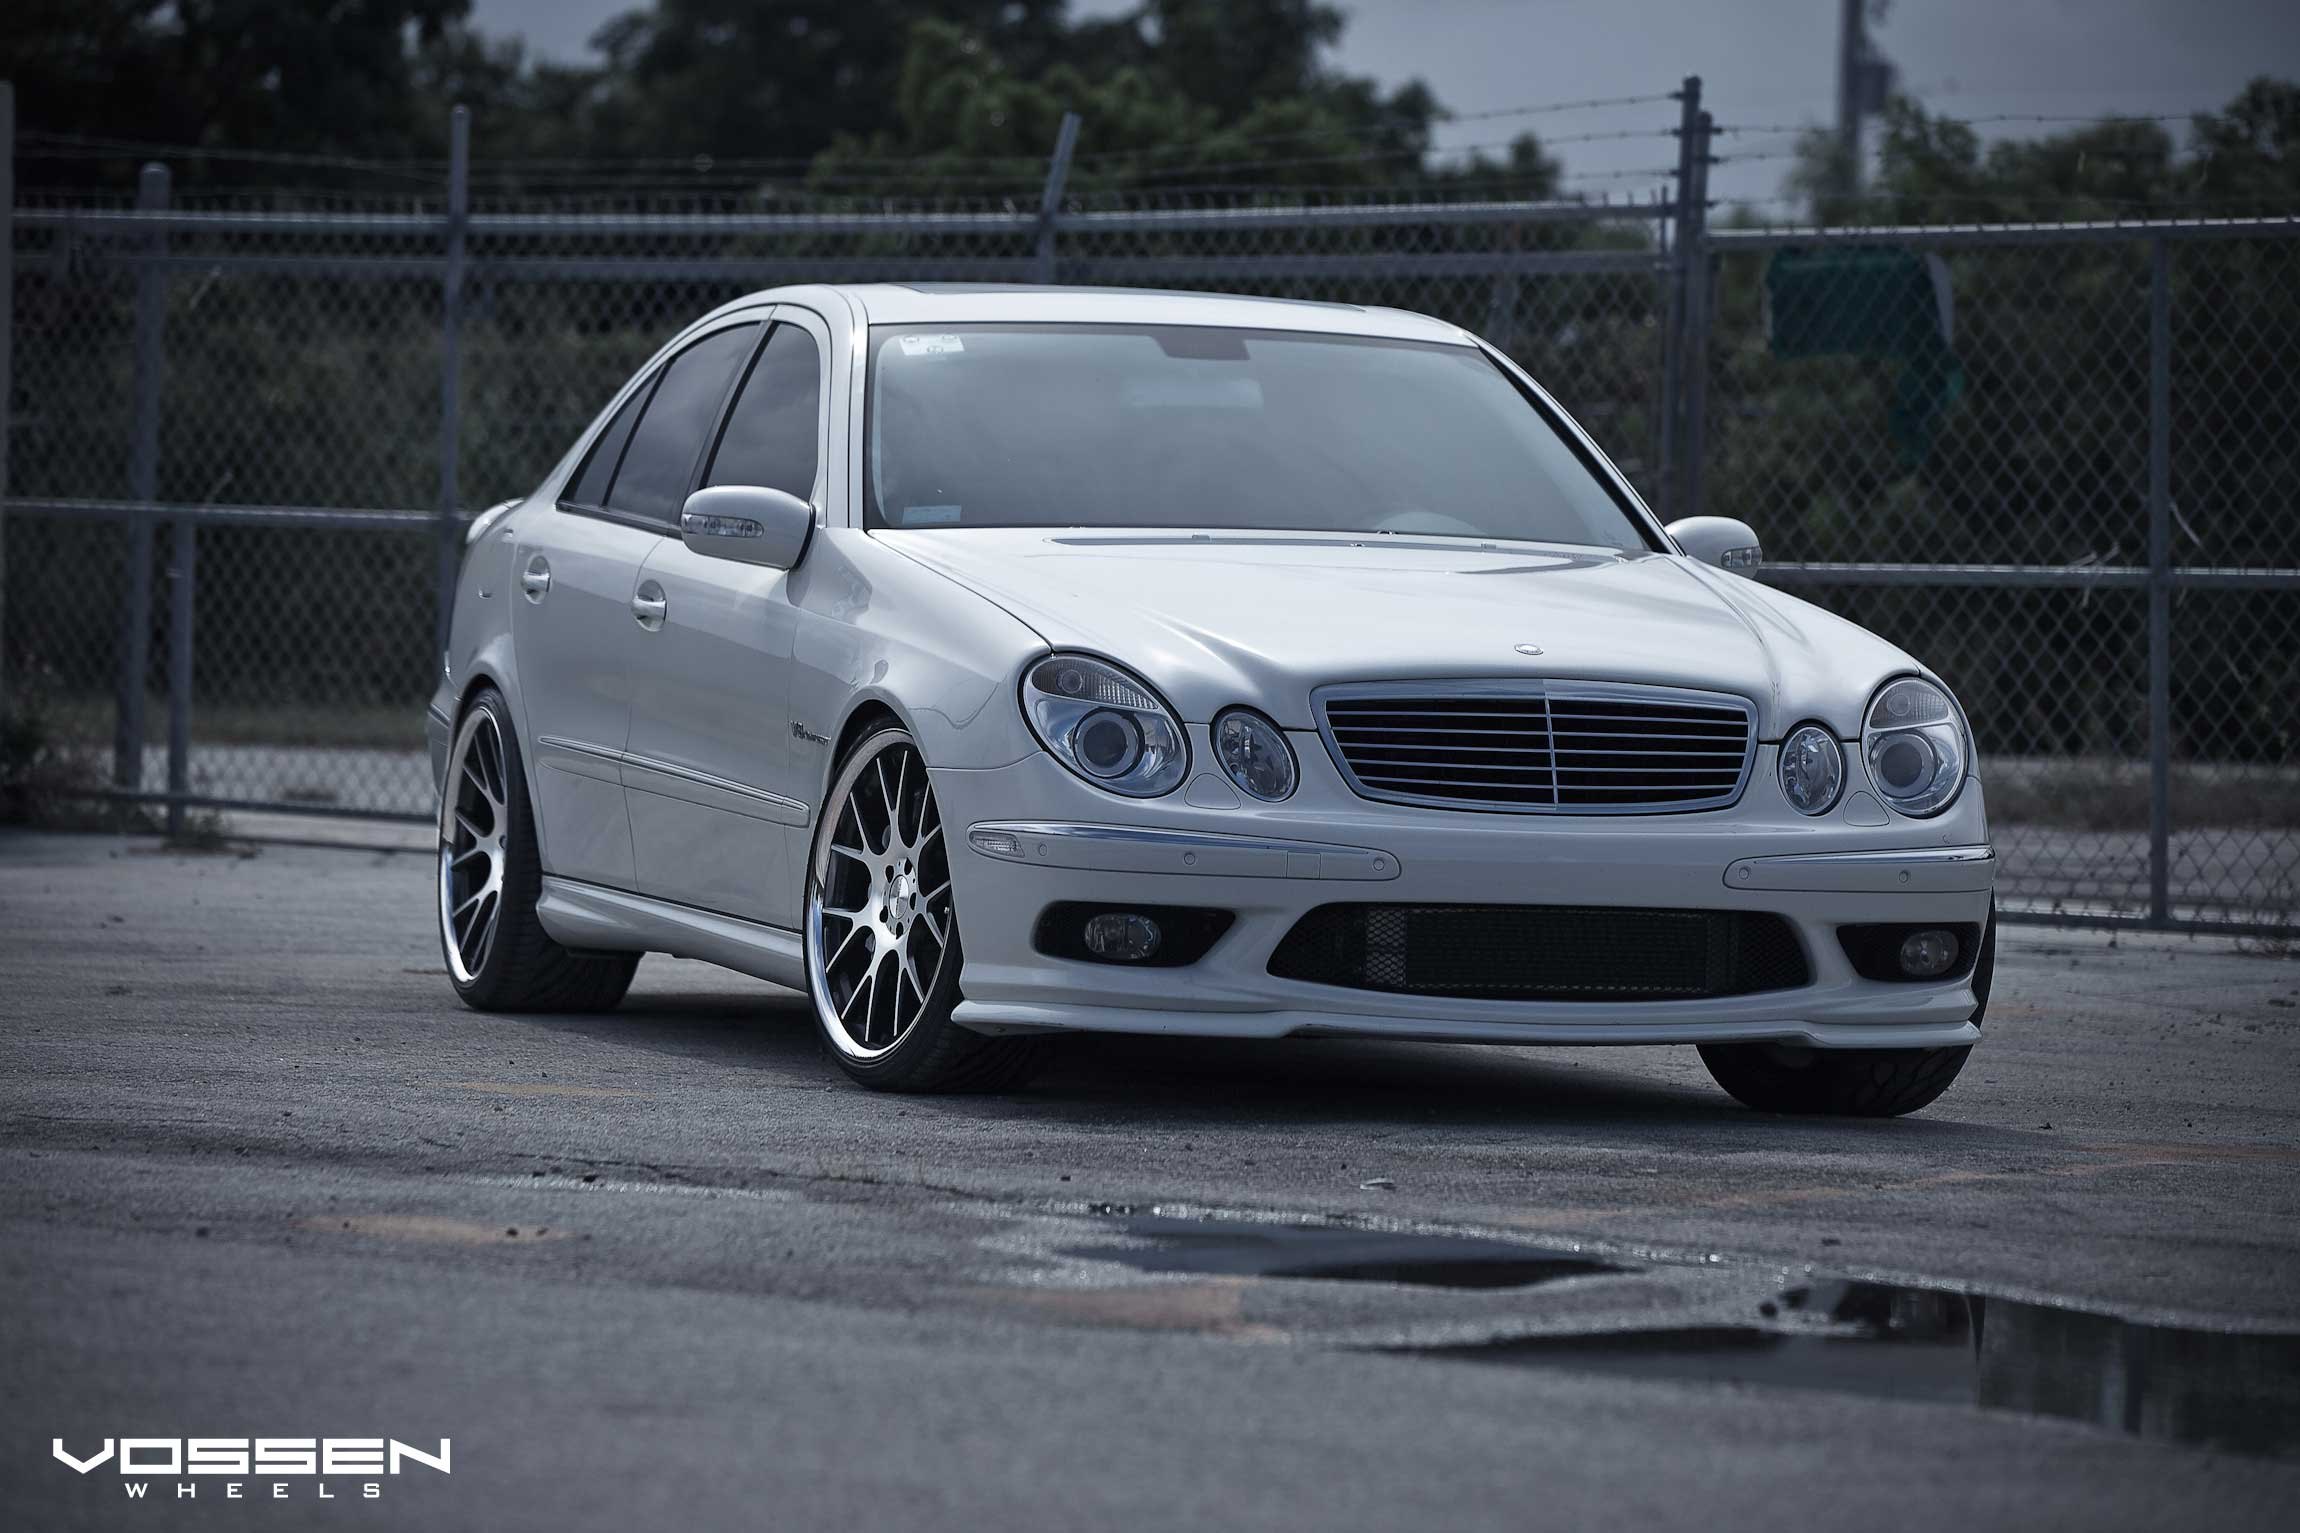 Custom White Mercedes E Class with Chrome Grille - Photo by Vossen